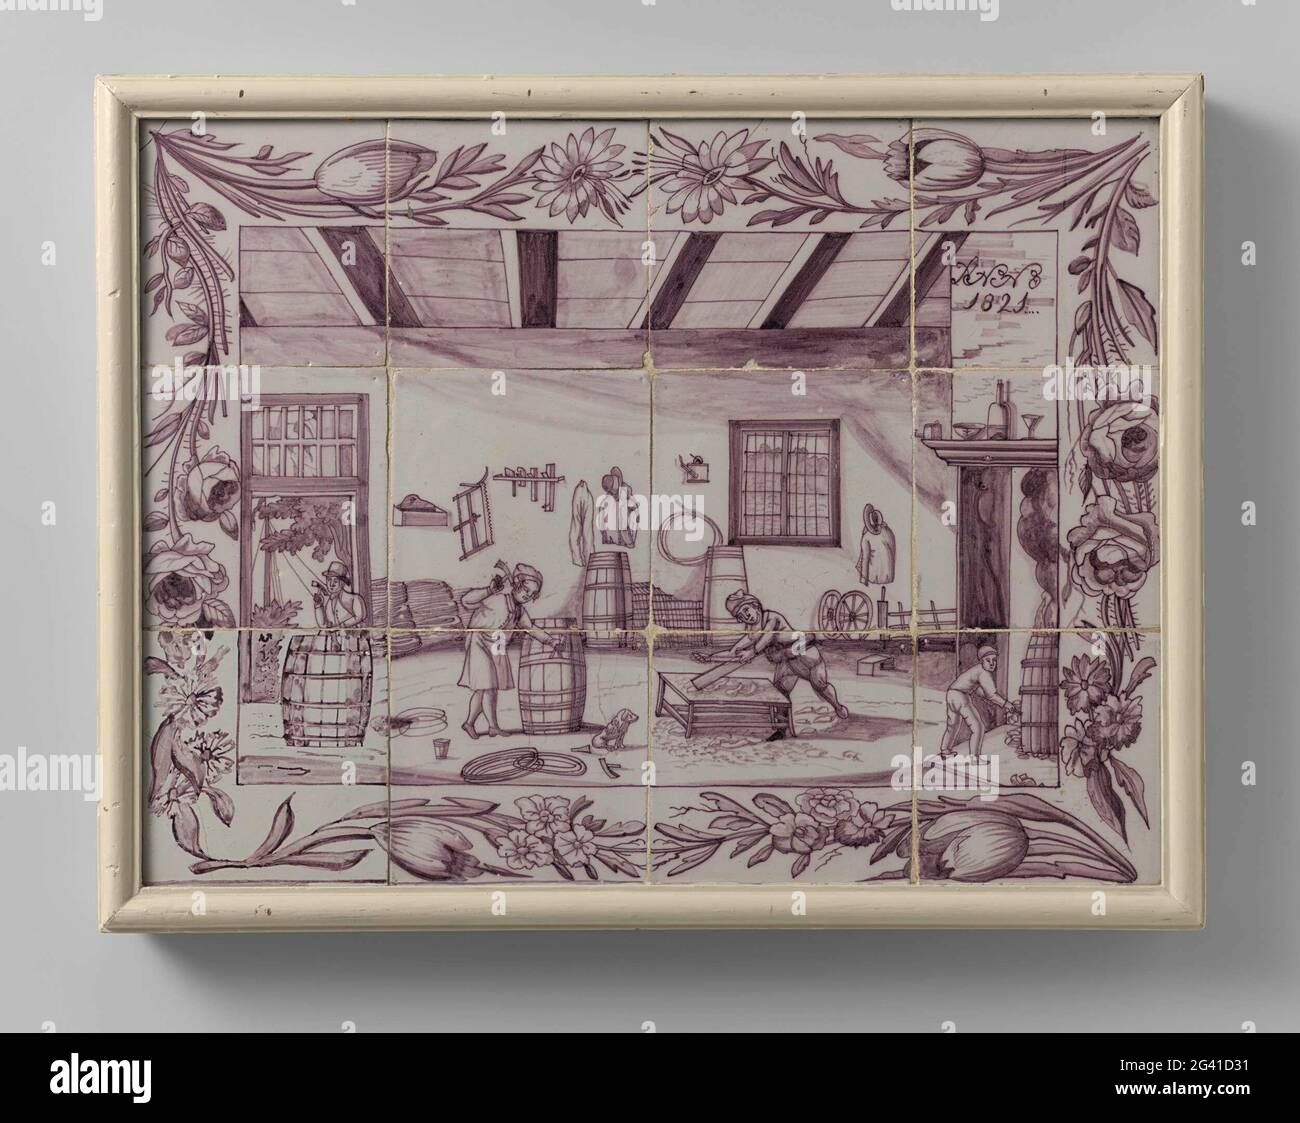 Tile tape from a bucket. Tile tile of twelve tiles (3 x 4) with purple painted figures in a cooperage. The frame consists of flowers. At the top right of the inscription: Anno 1821. Stock Photo